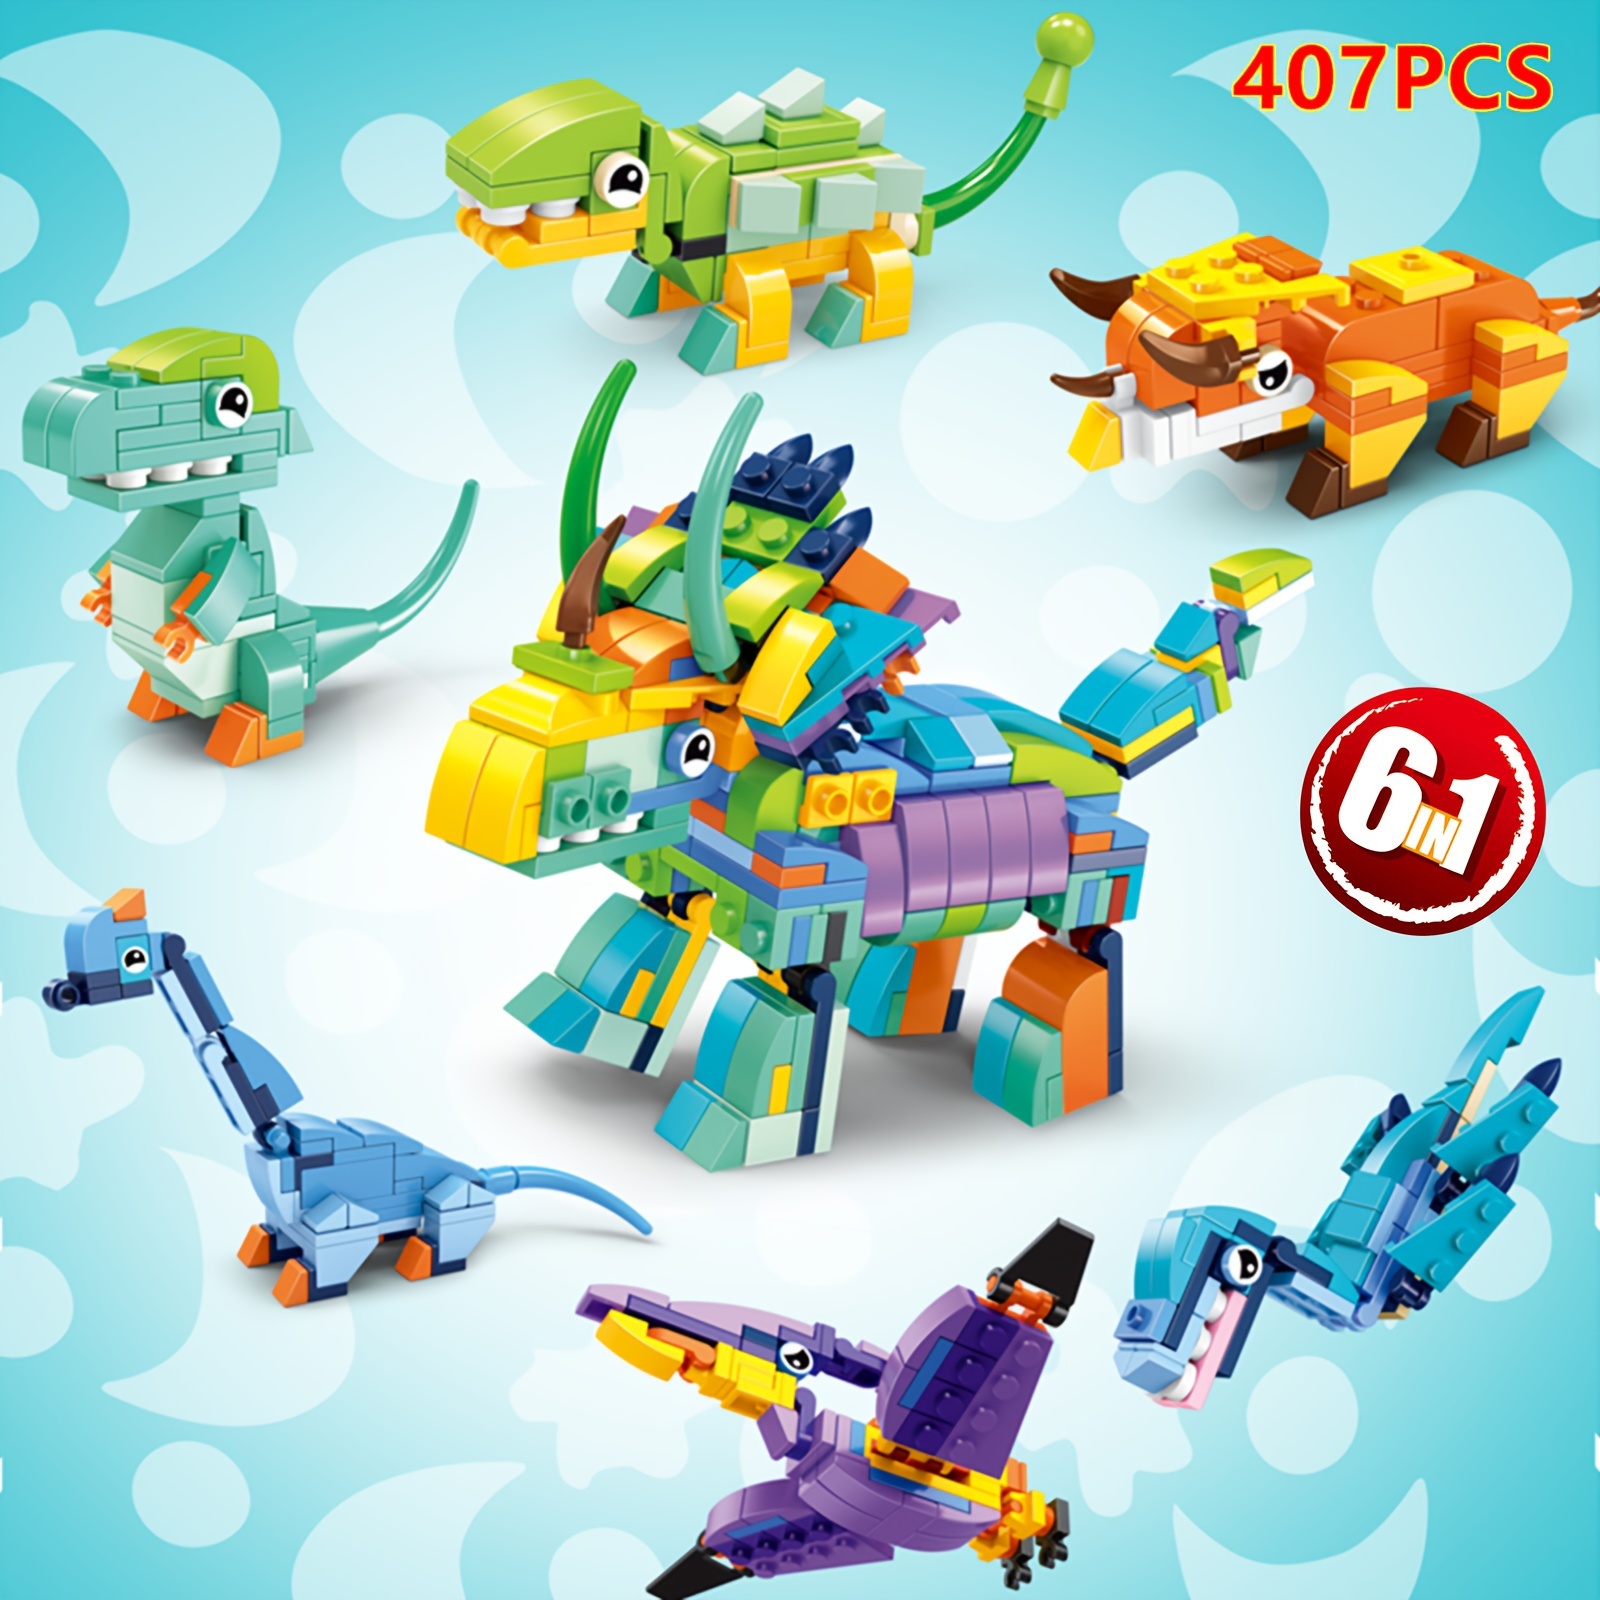 

6-piece Dinosaur Building Set - 407pc Construction Block Kit With Transformable Triceratops | Educational Stem Toy For Youngsters Ages 6-8, Durable Abs Material | Ideal Christmas & Birthday Gift